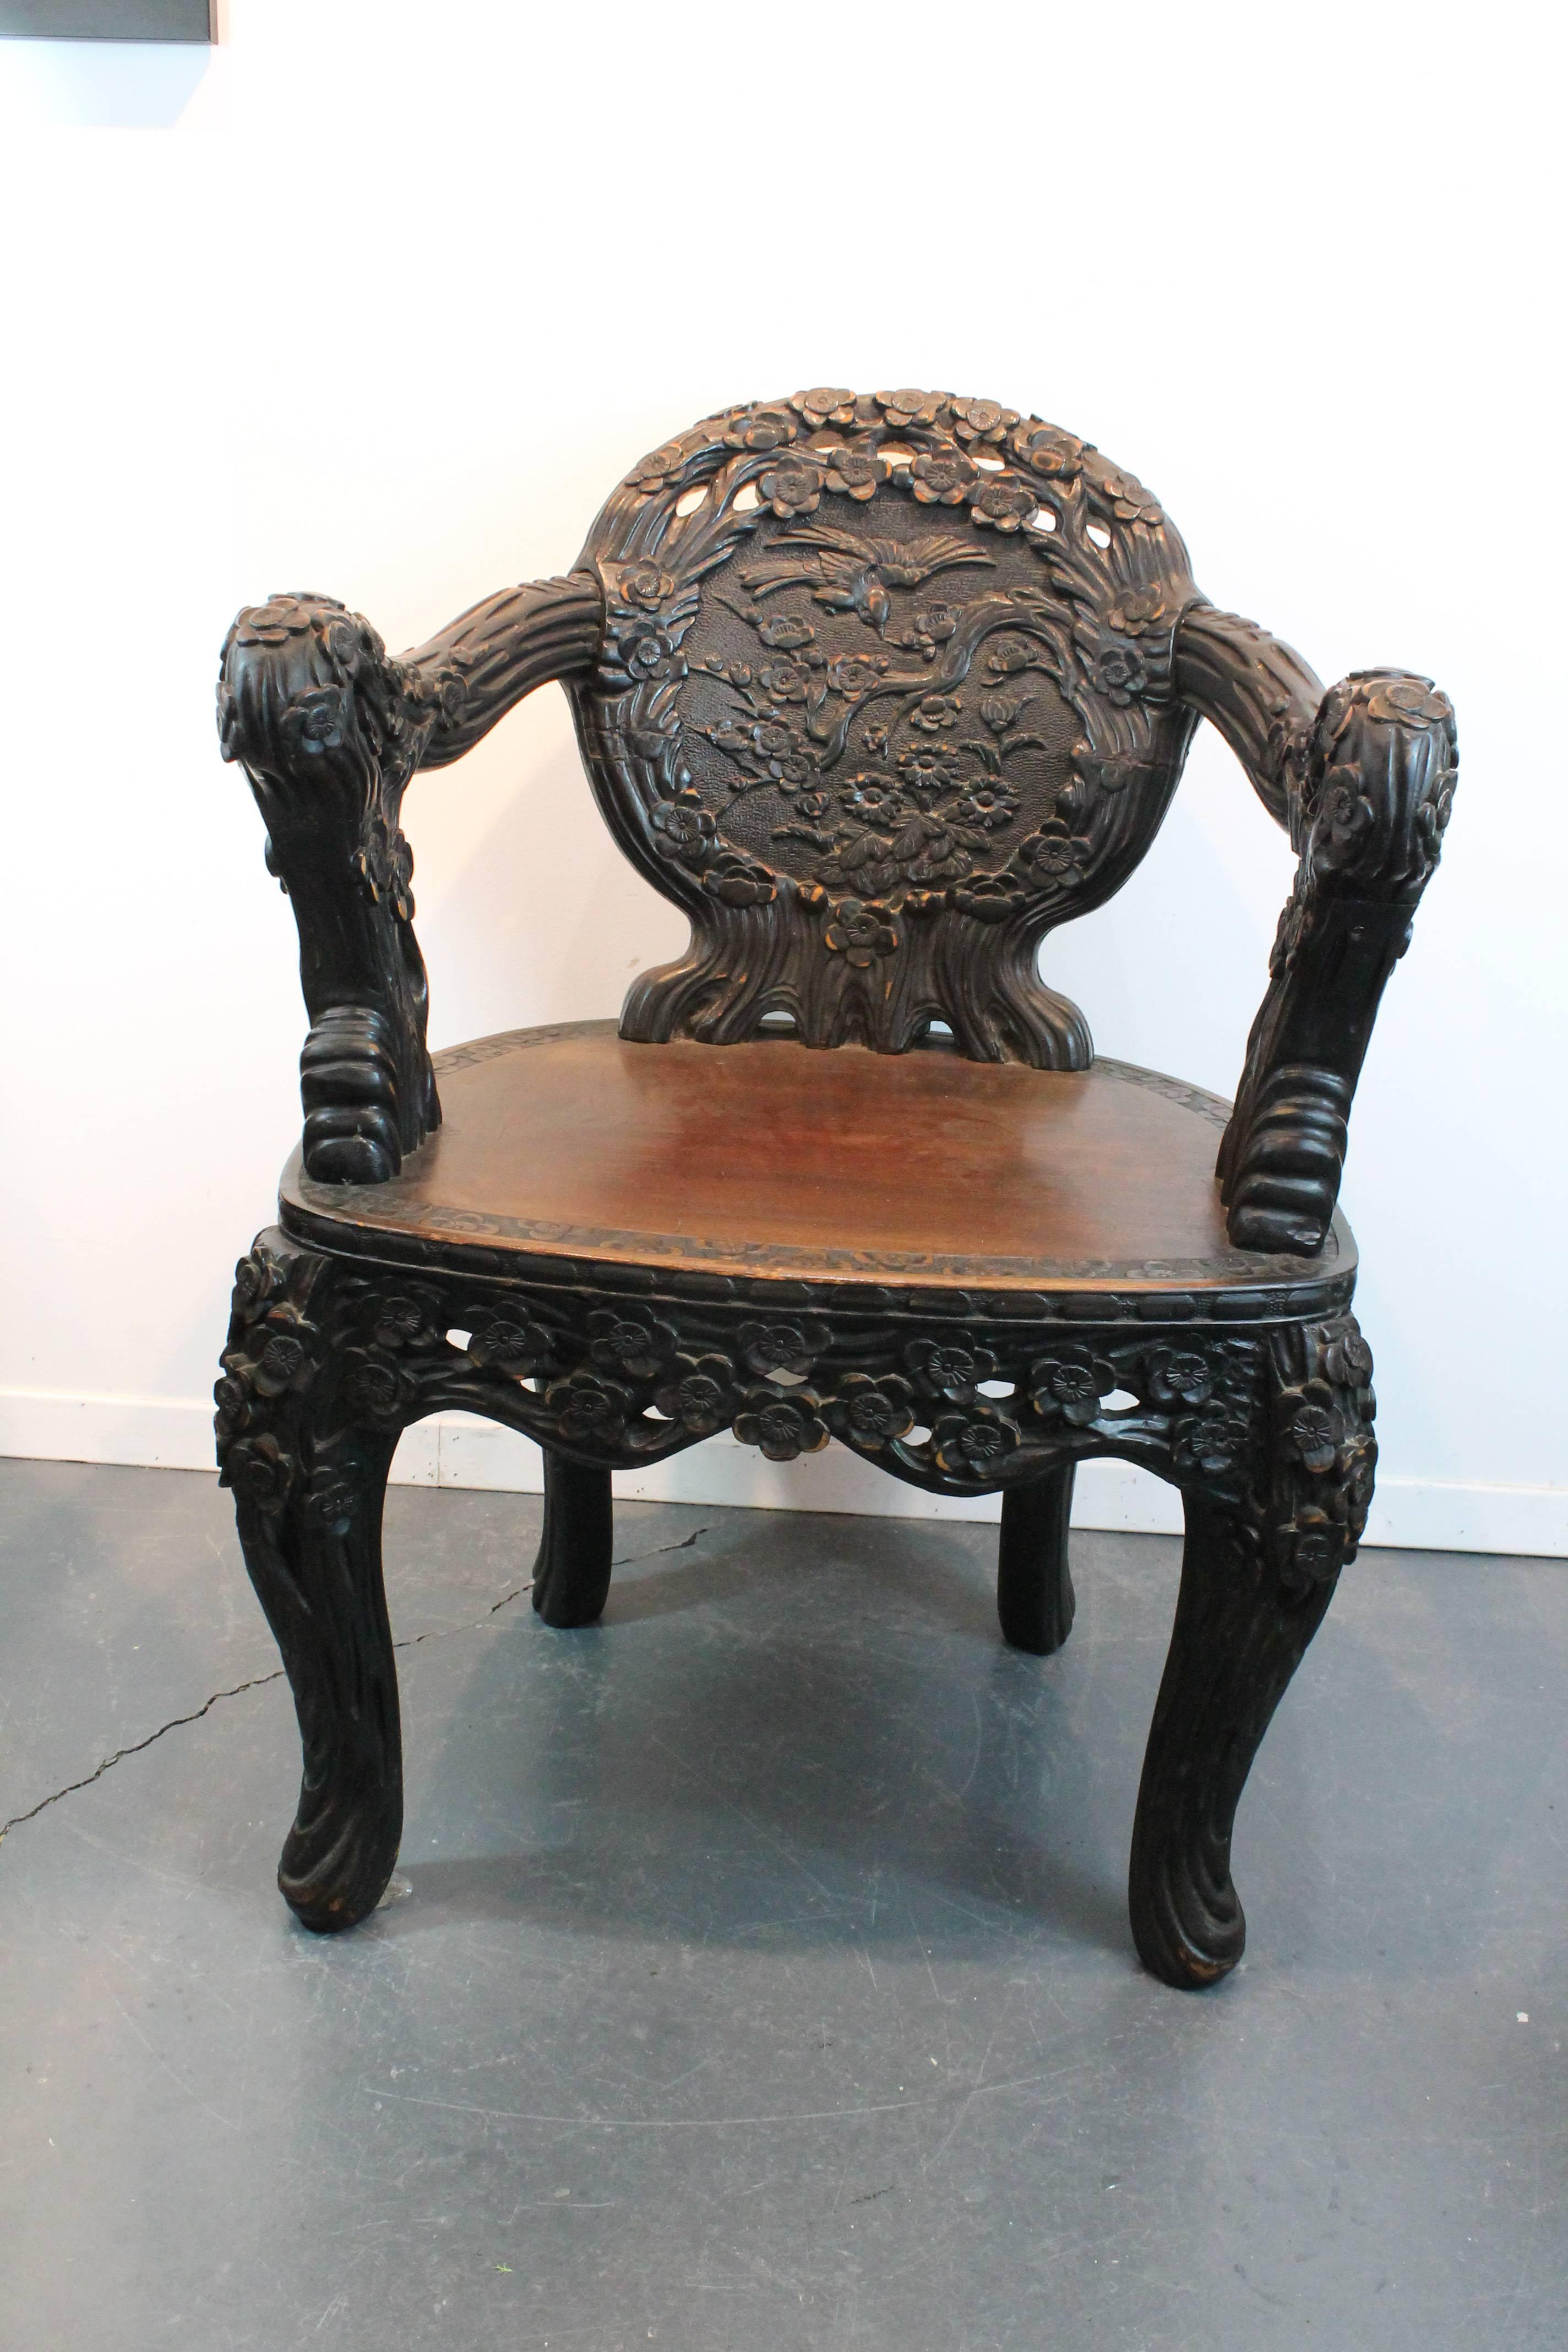 Early 20th Century very heavily carved Chinese arm chair with cherry blossoms throughout the legs , skirt , arms , and seat.
The back is a carved cloud form design and the back rest has a scene with cherry blossom limbs and birds.